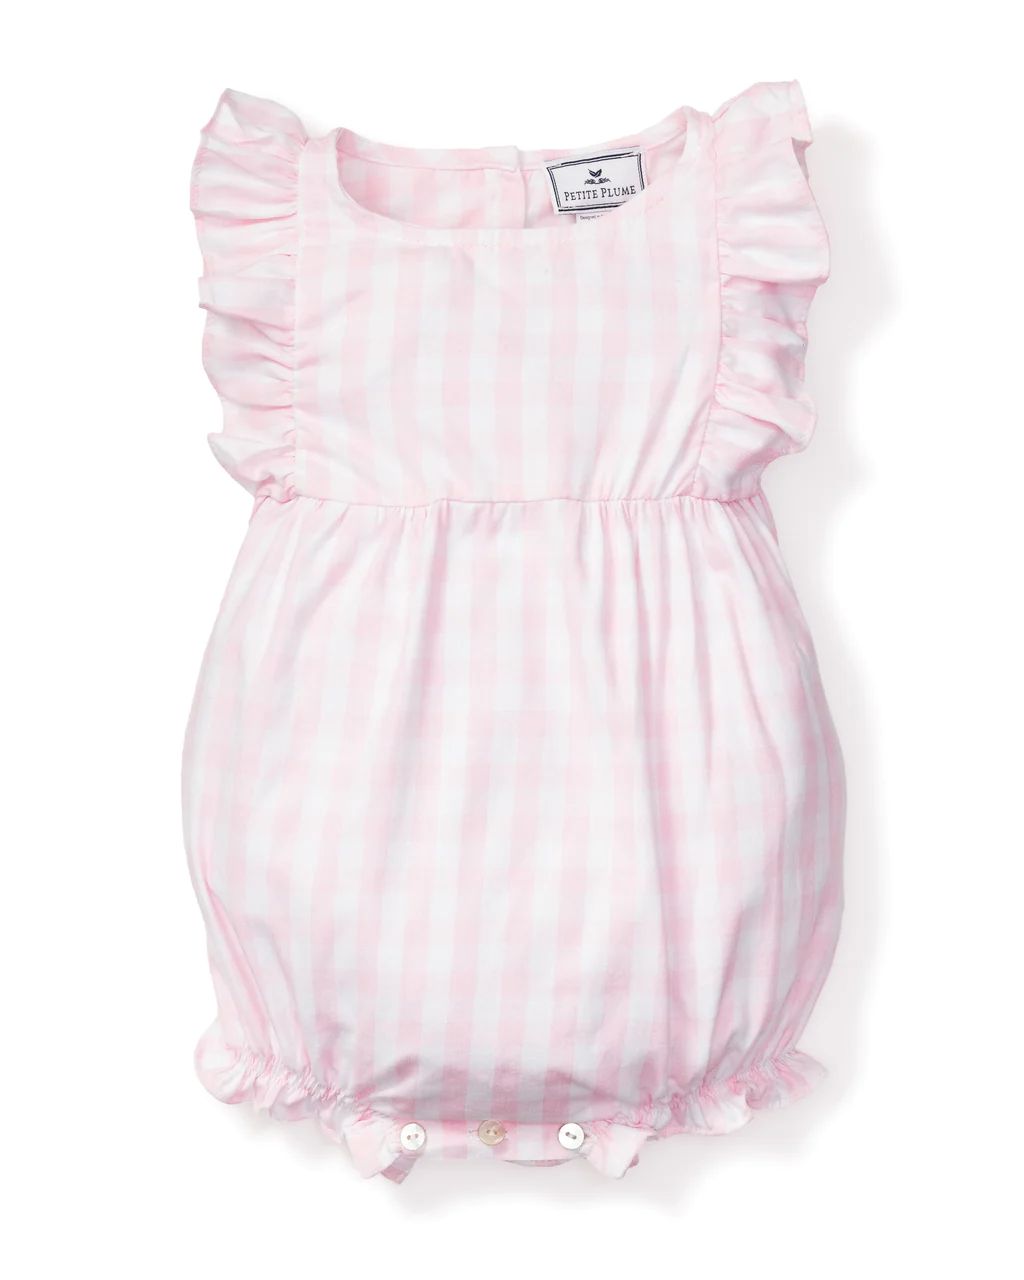 Baby's Twill Ruffled Romper in Pink Gingham | Petite Plume